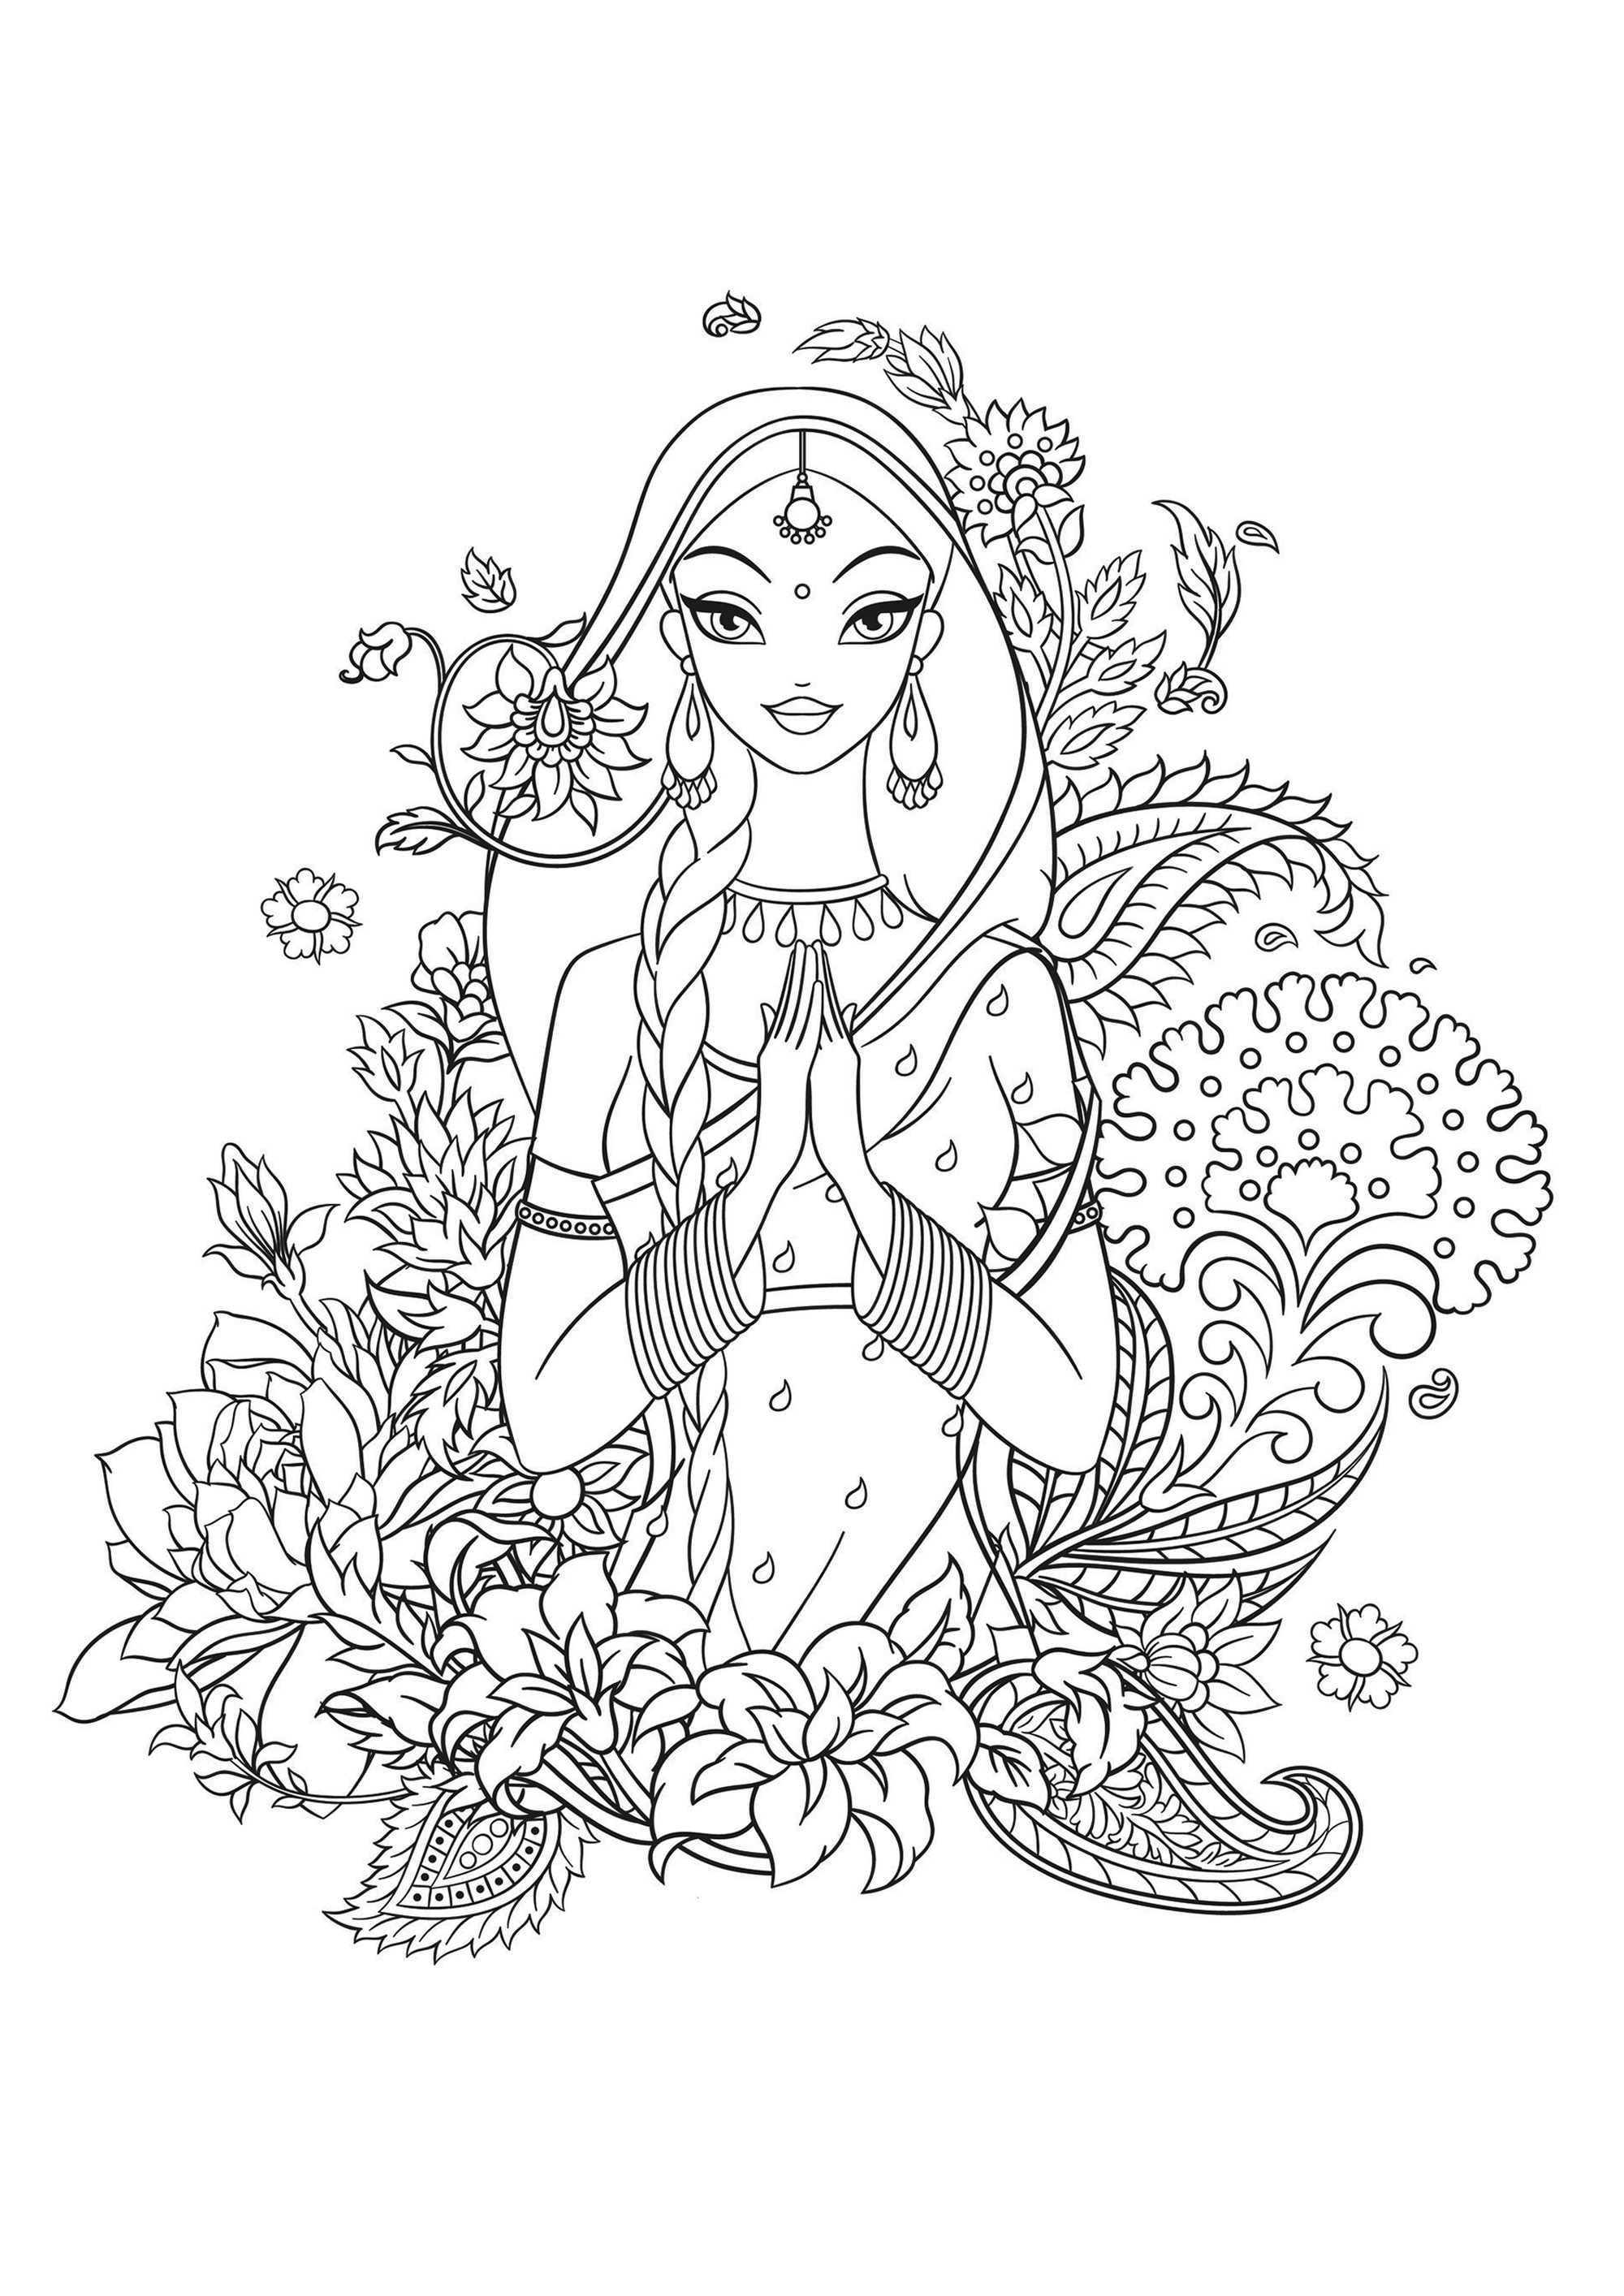 Indian girl in sari surrounded with flowers and traditional indian ornaments, Source : 123rf   Artist : Maia3000